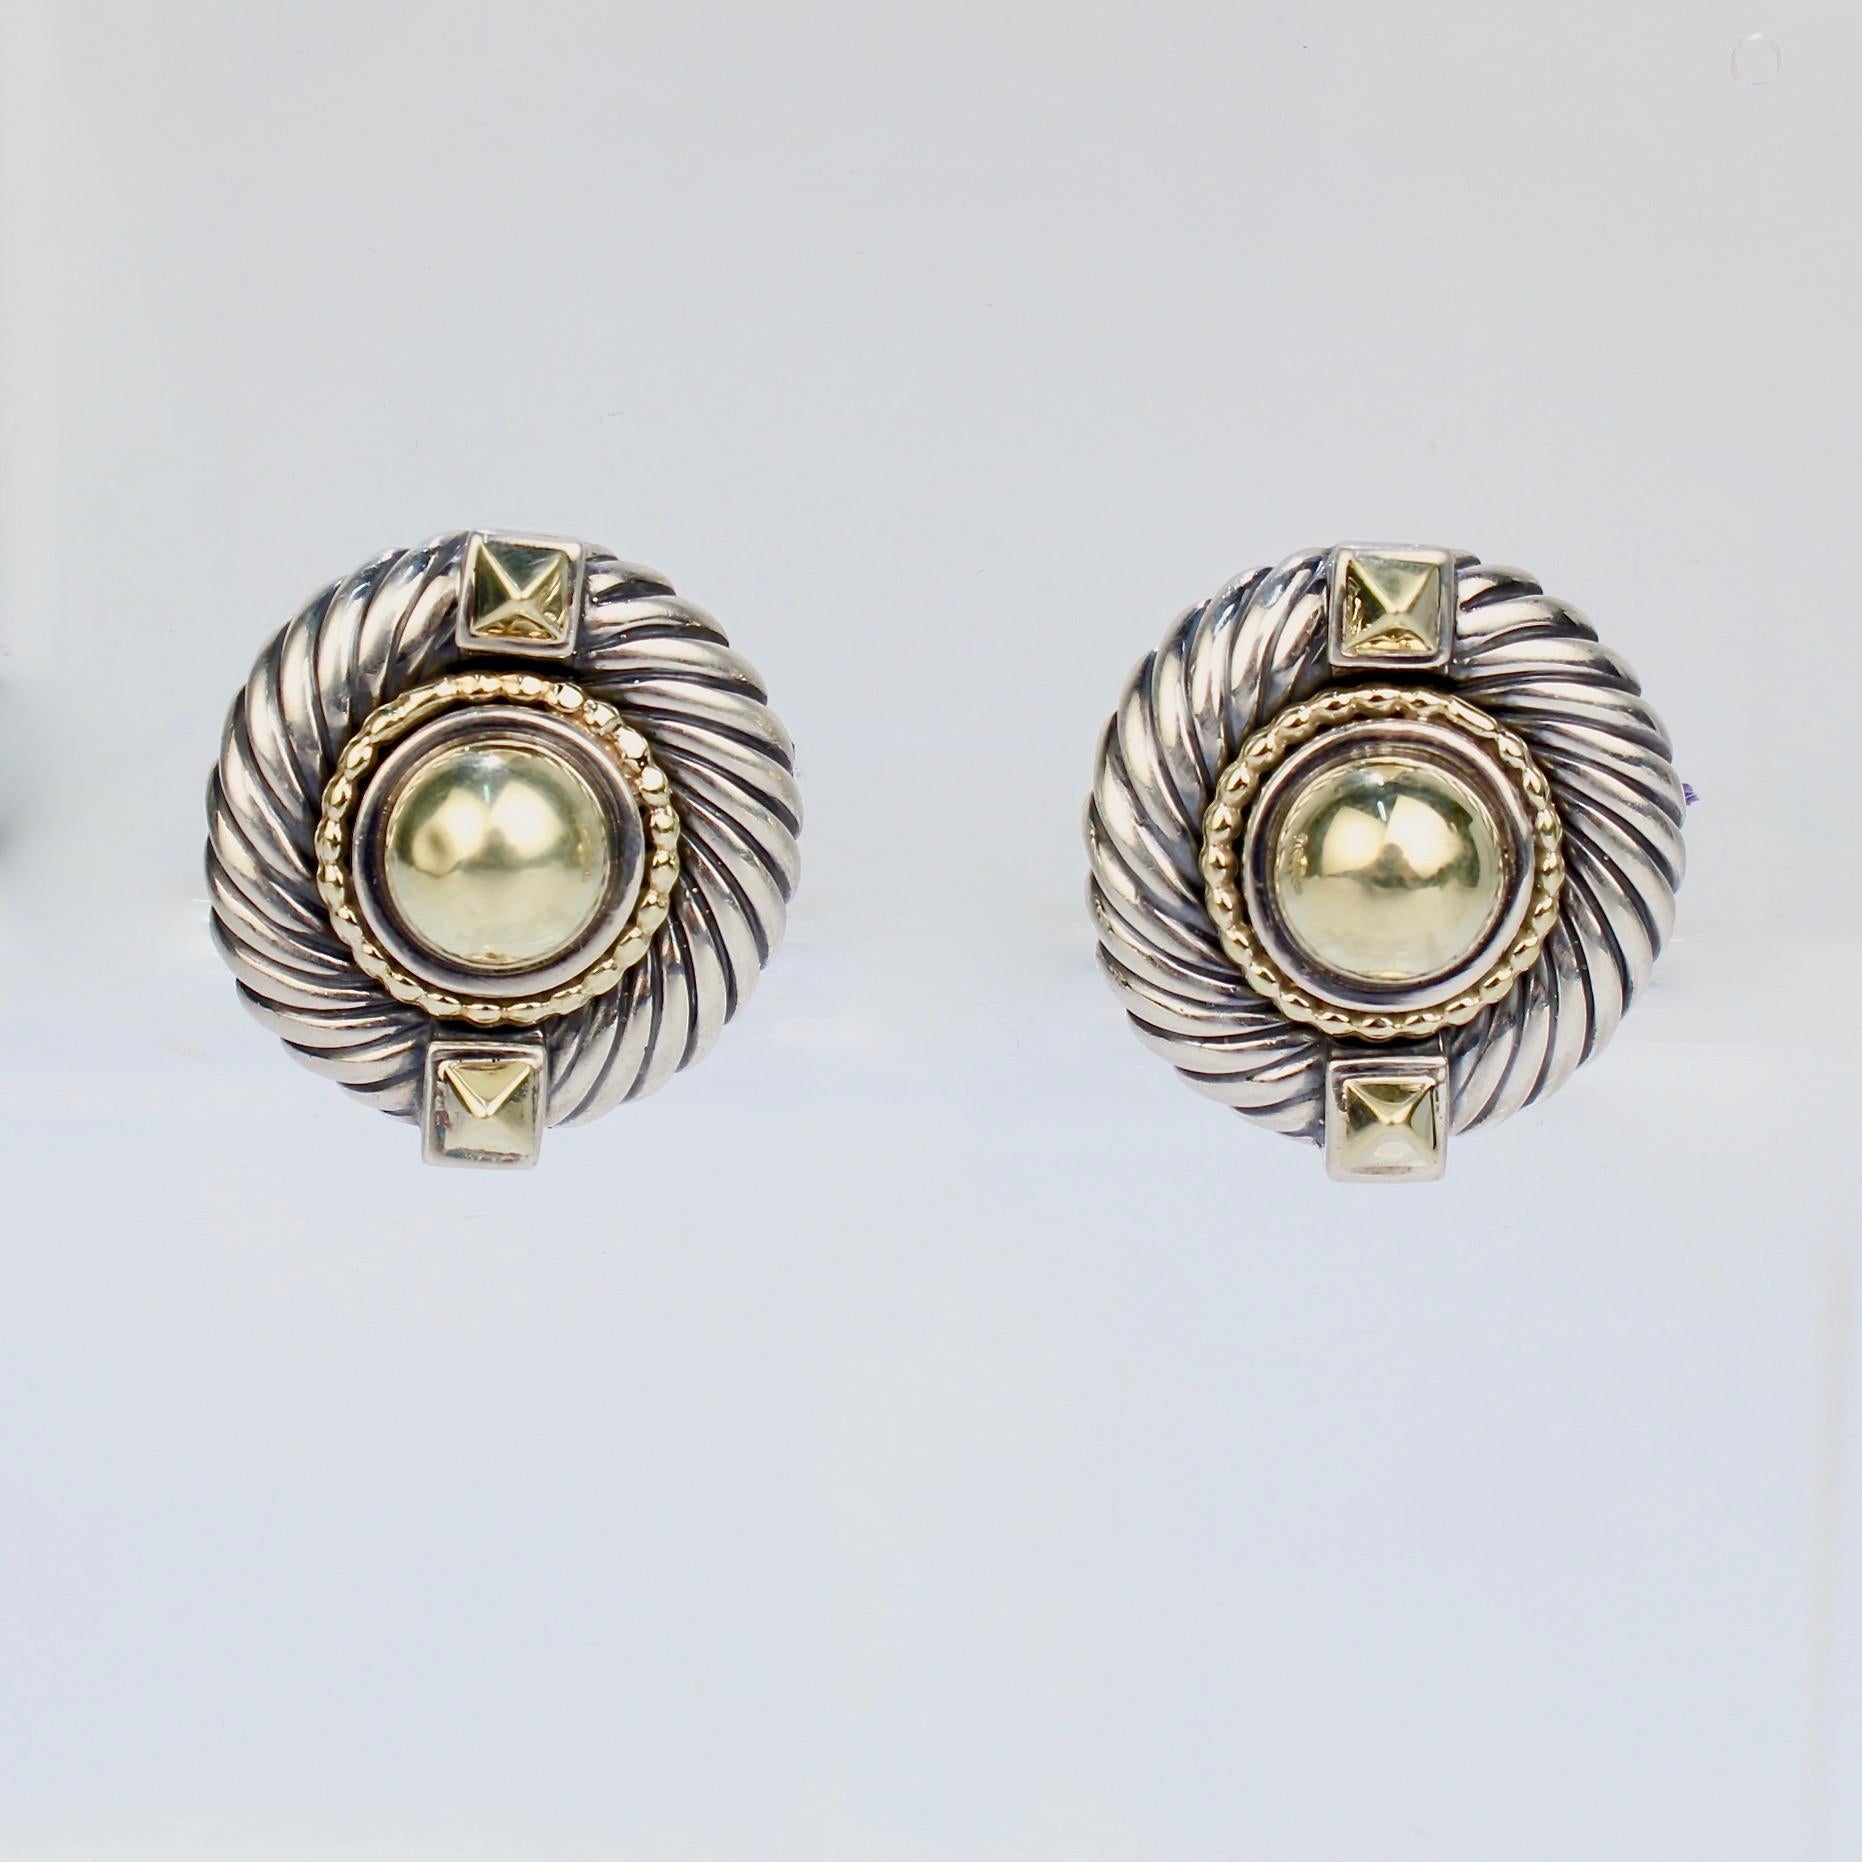 A wonderful pair of David Yurman Renaissance earrings.

Comprised of sterling silver and 14k gold. Each earring has a domed central gold cabochon flanked by two pyramid shaped buttons. The gold cabochons are framed in a beaded gold wire and Yurman's